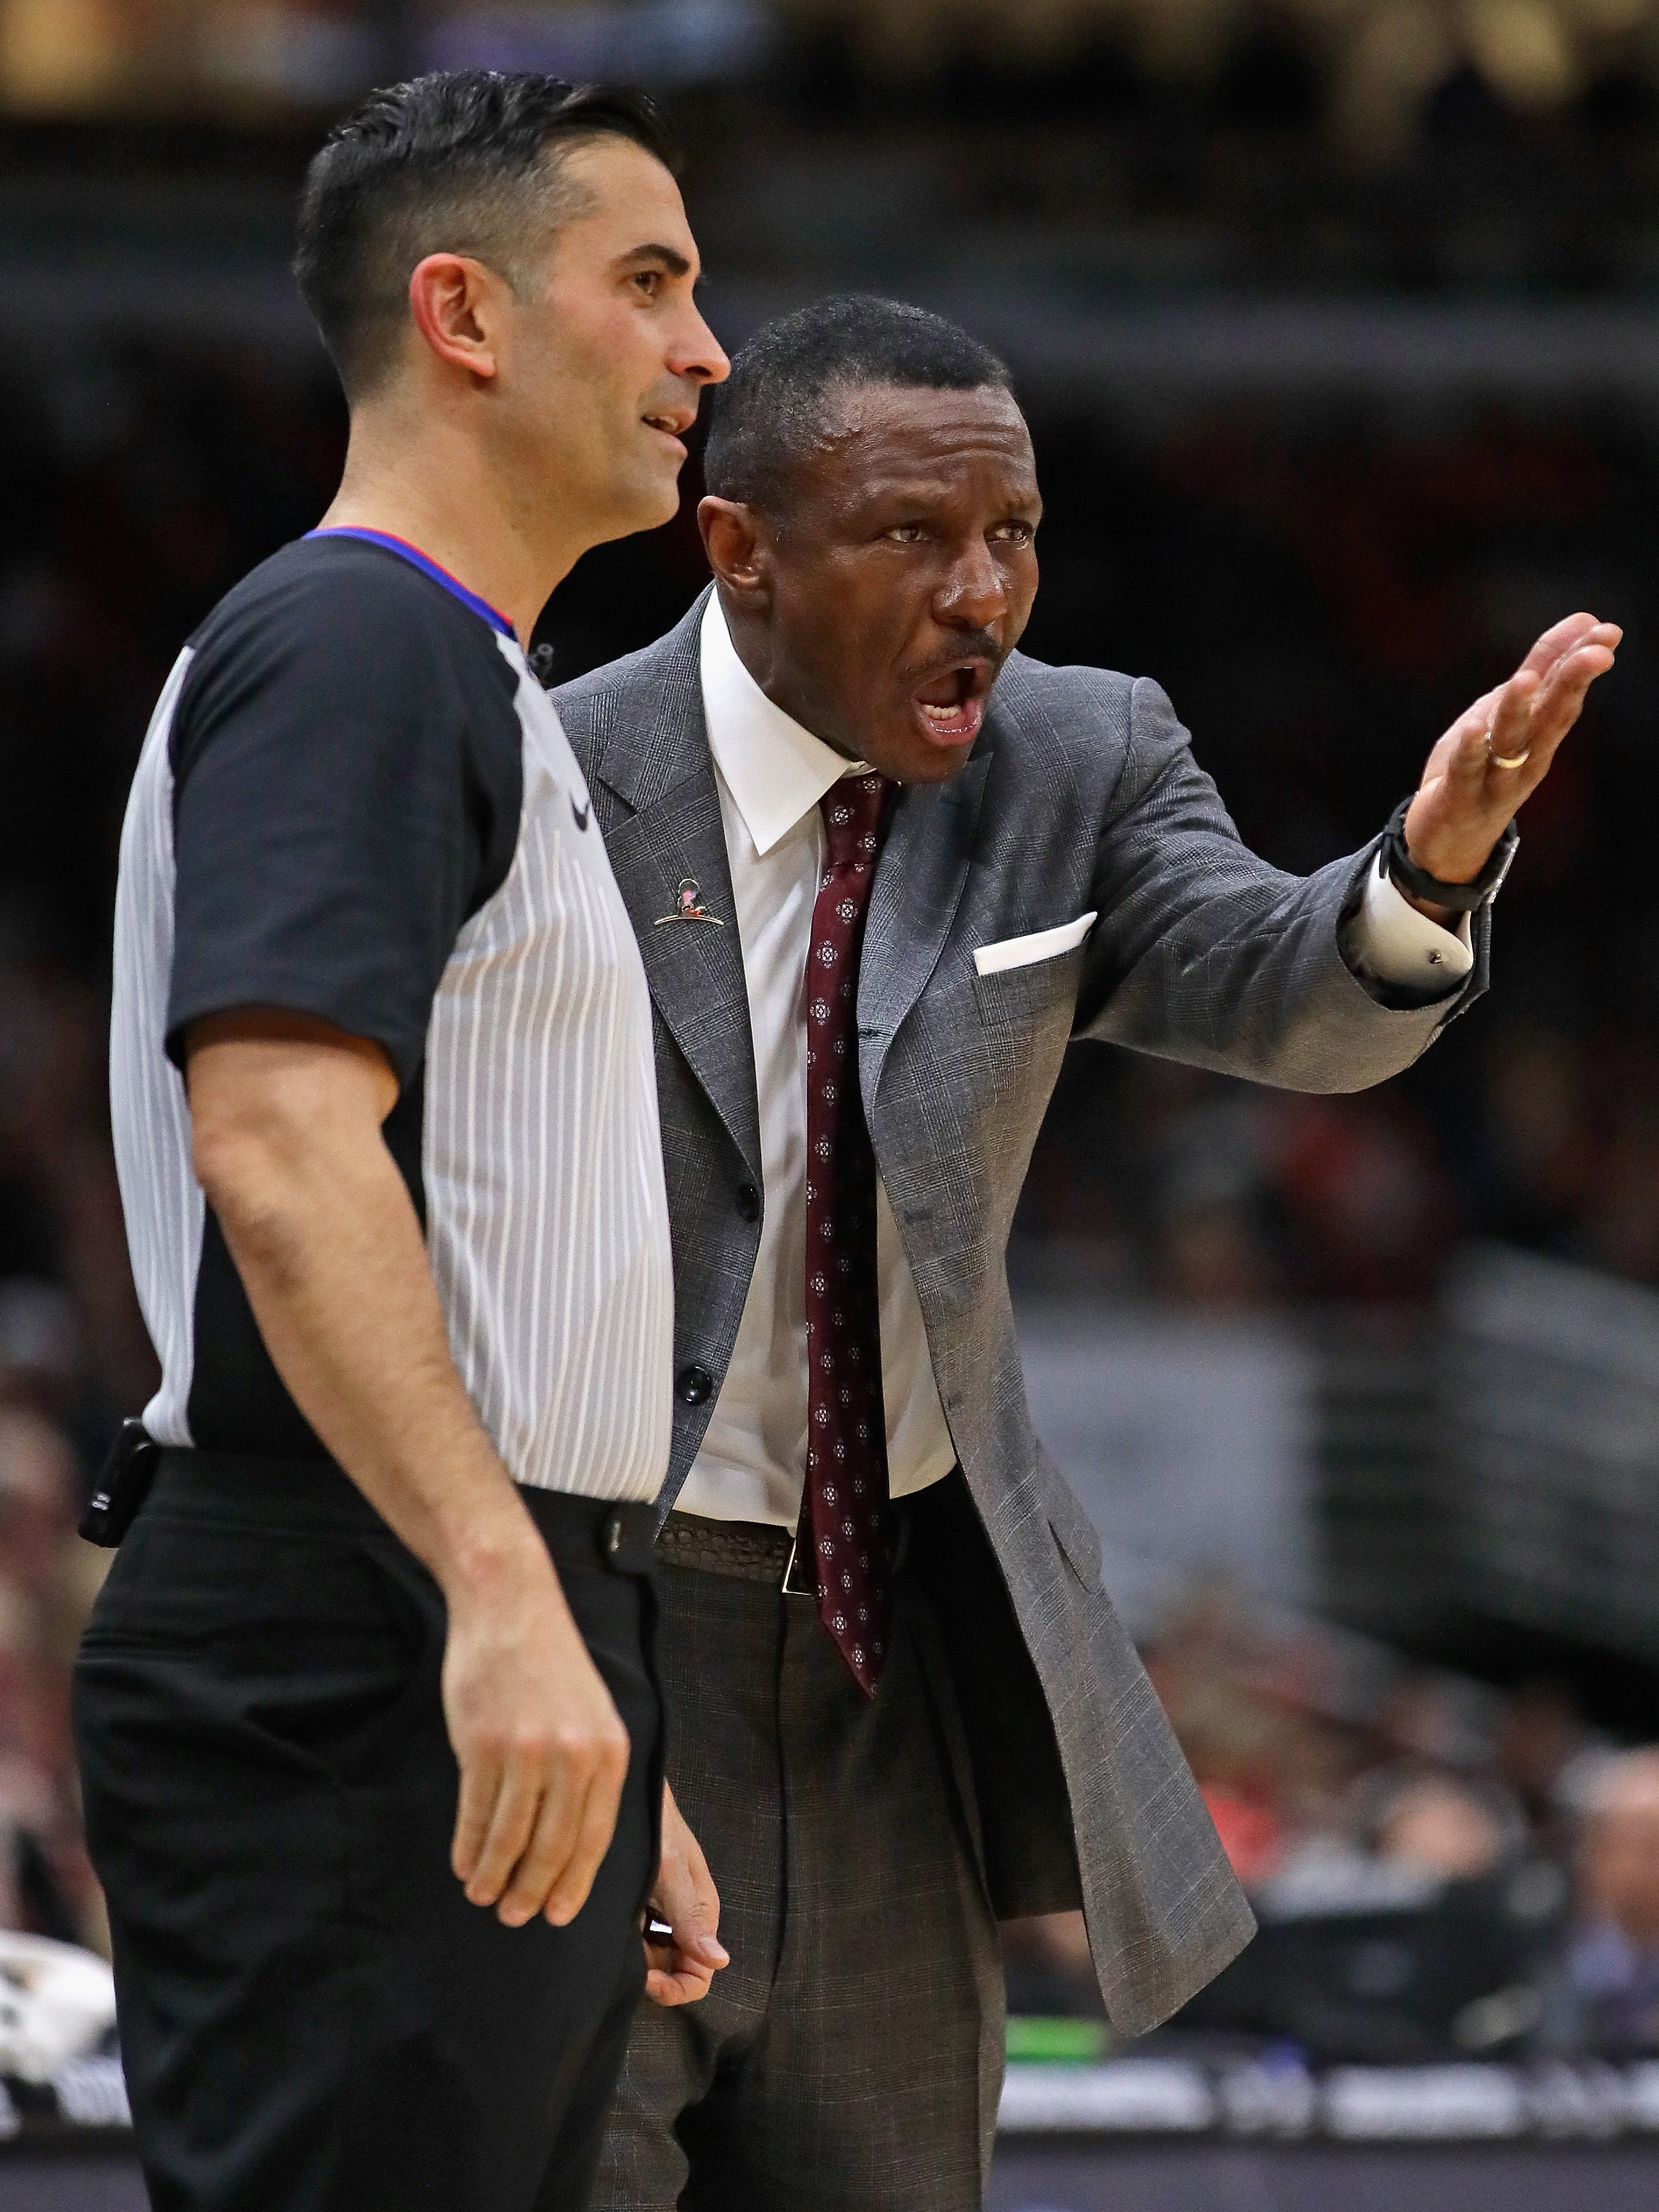 Head coach Dwane Casey argues with referee Zach Zarba #15 during a game against the Chicago Bulls at the United Center on February 14, 2018 in Chicago, Illinois. The Raptors defeated the Bulls 122-98.